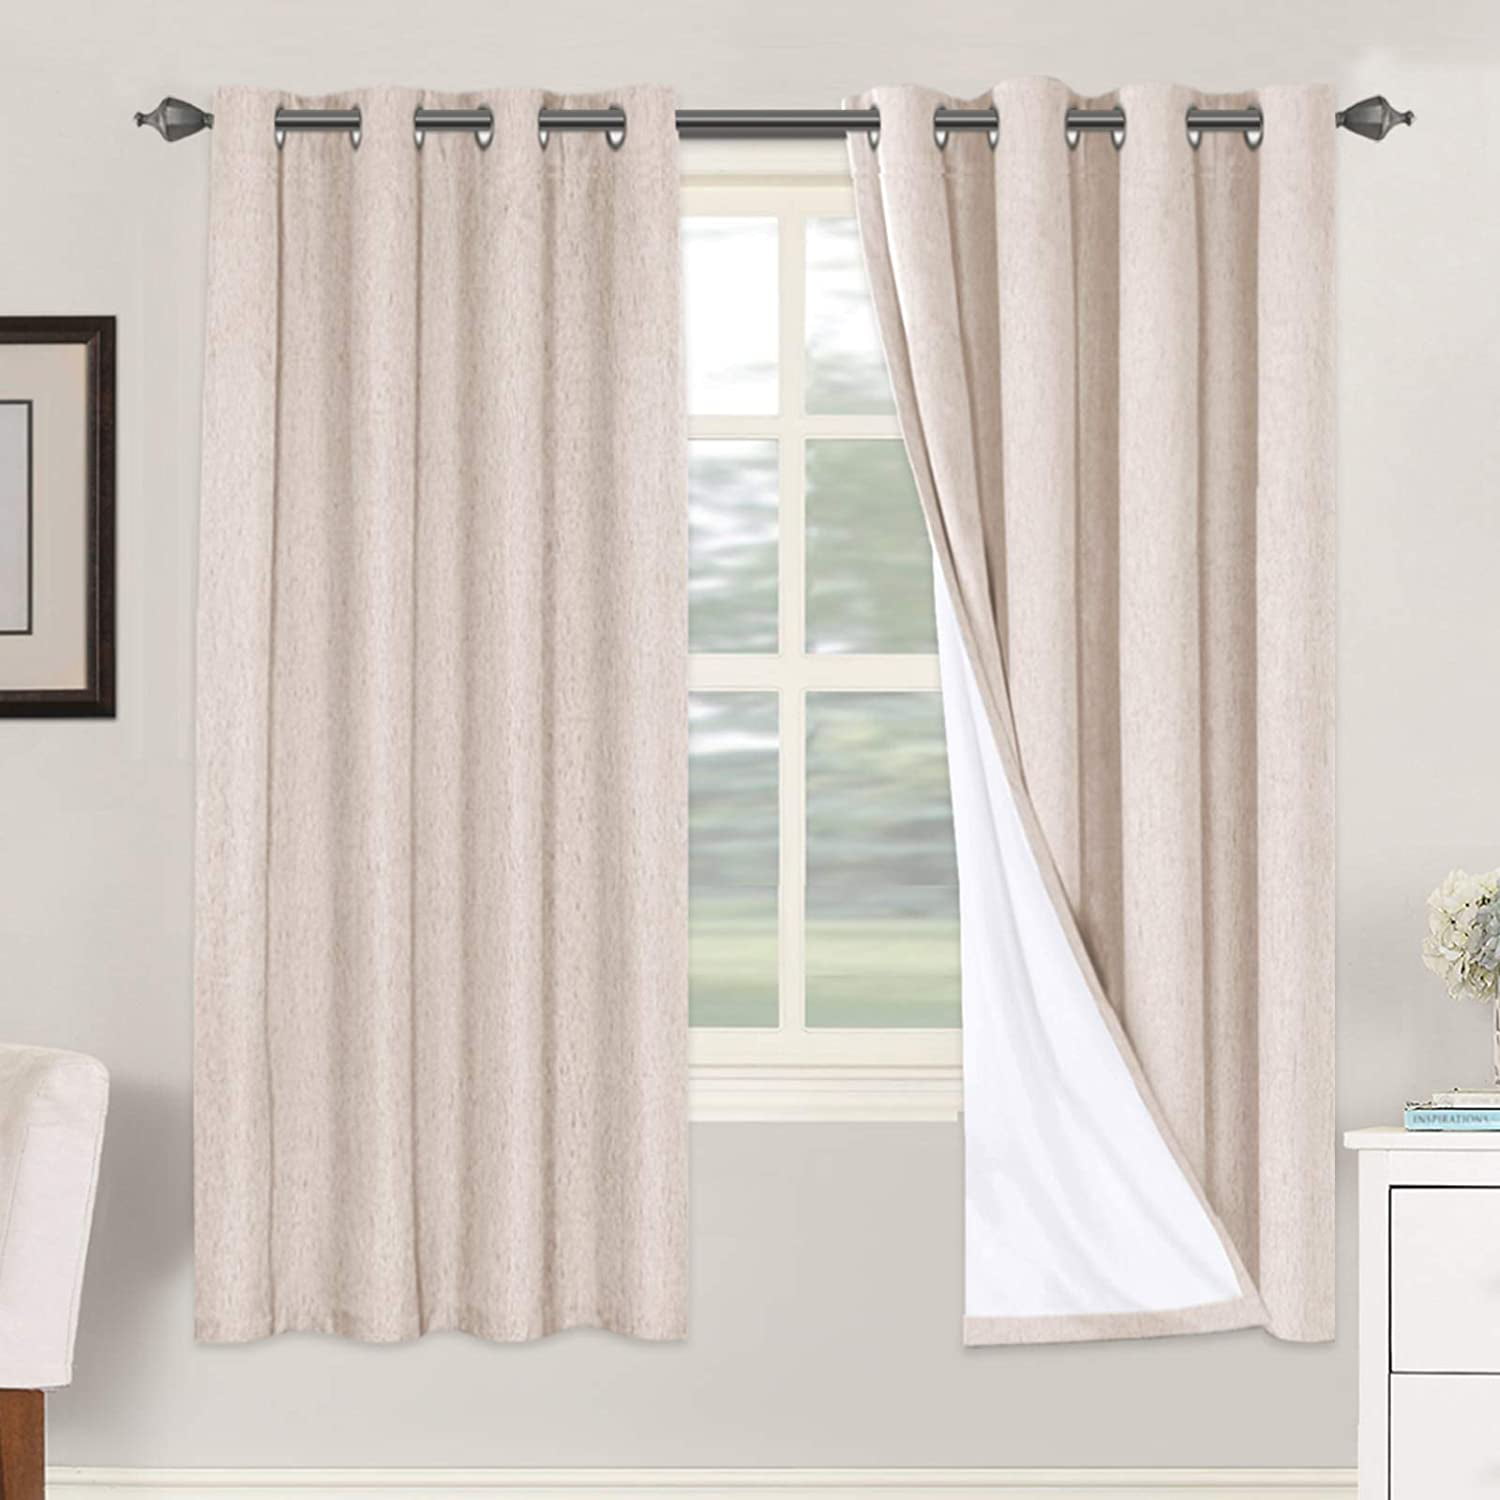 Linen Blackout Curtains 72 Inches Long 100% Absolutely Blackout Thermal